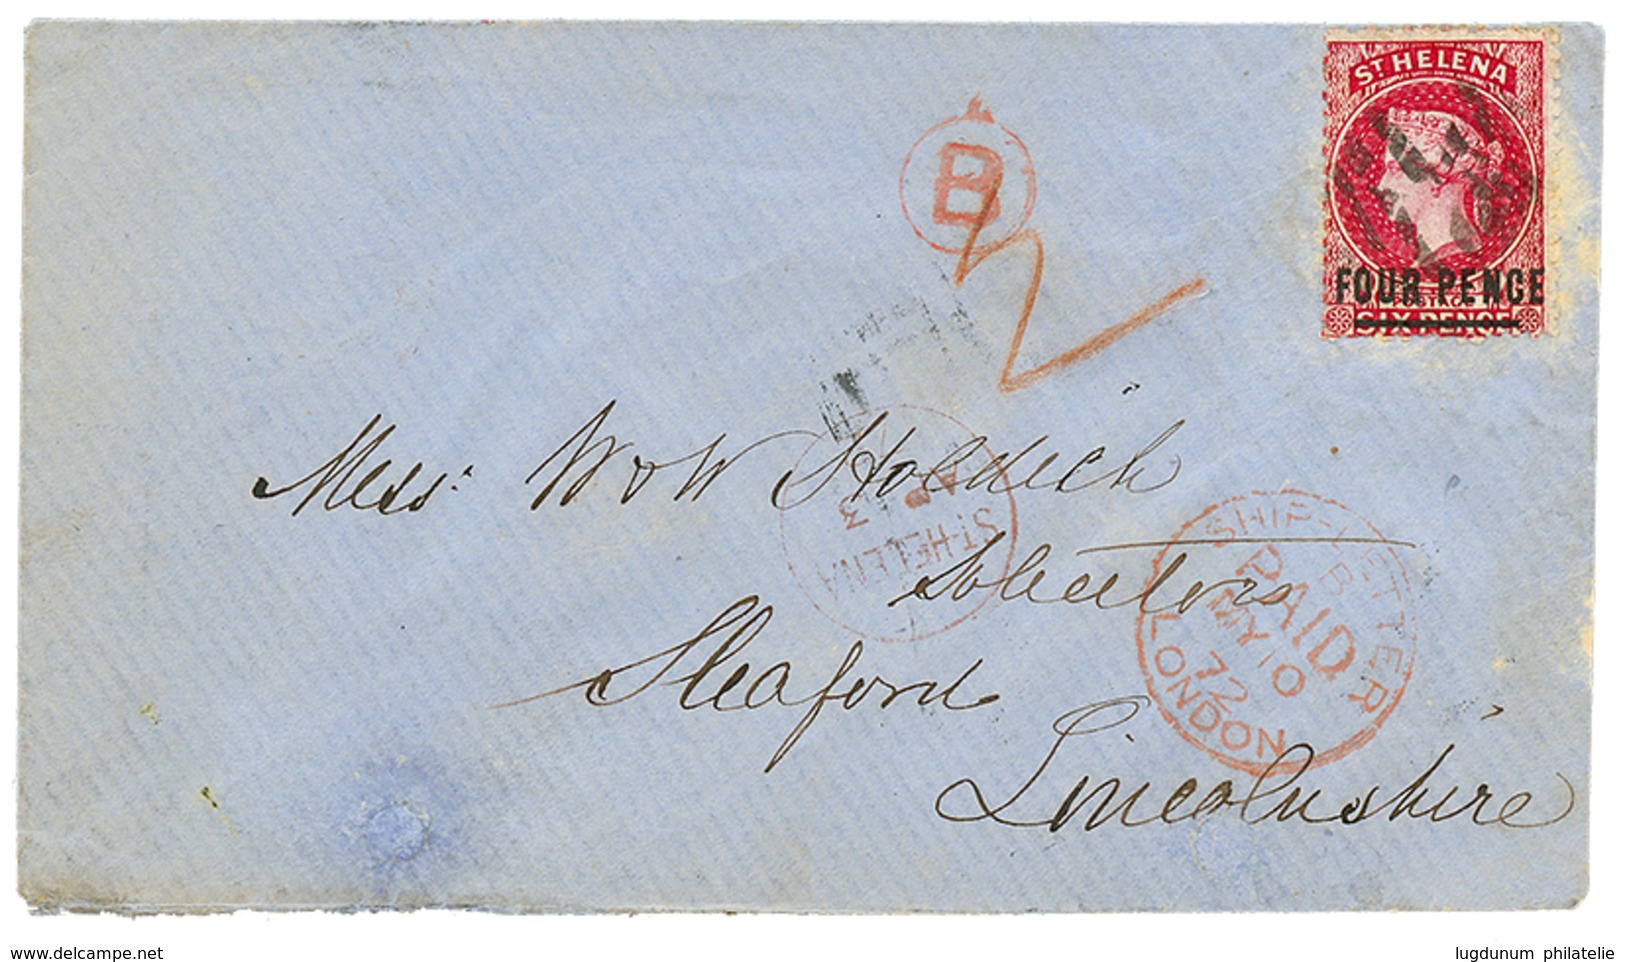 ST HELENA : 1872 4d On 6d + ST HELENA In Red On Envelope (toning) To ENGLAND. RARE. Vf. - Saint Helena Island